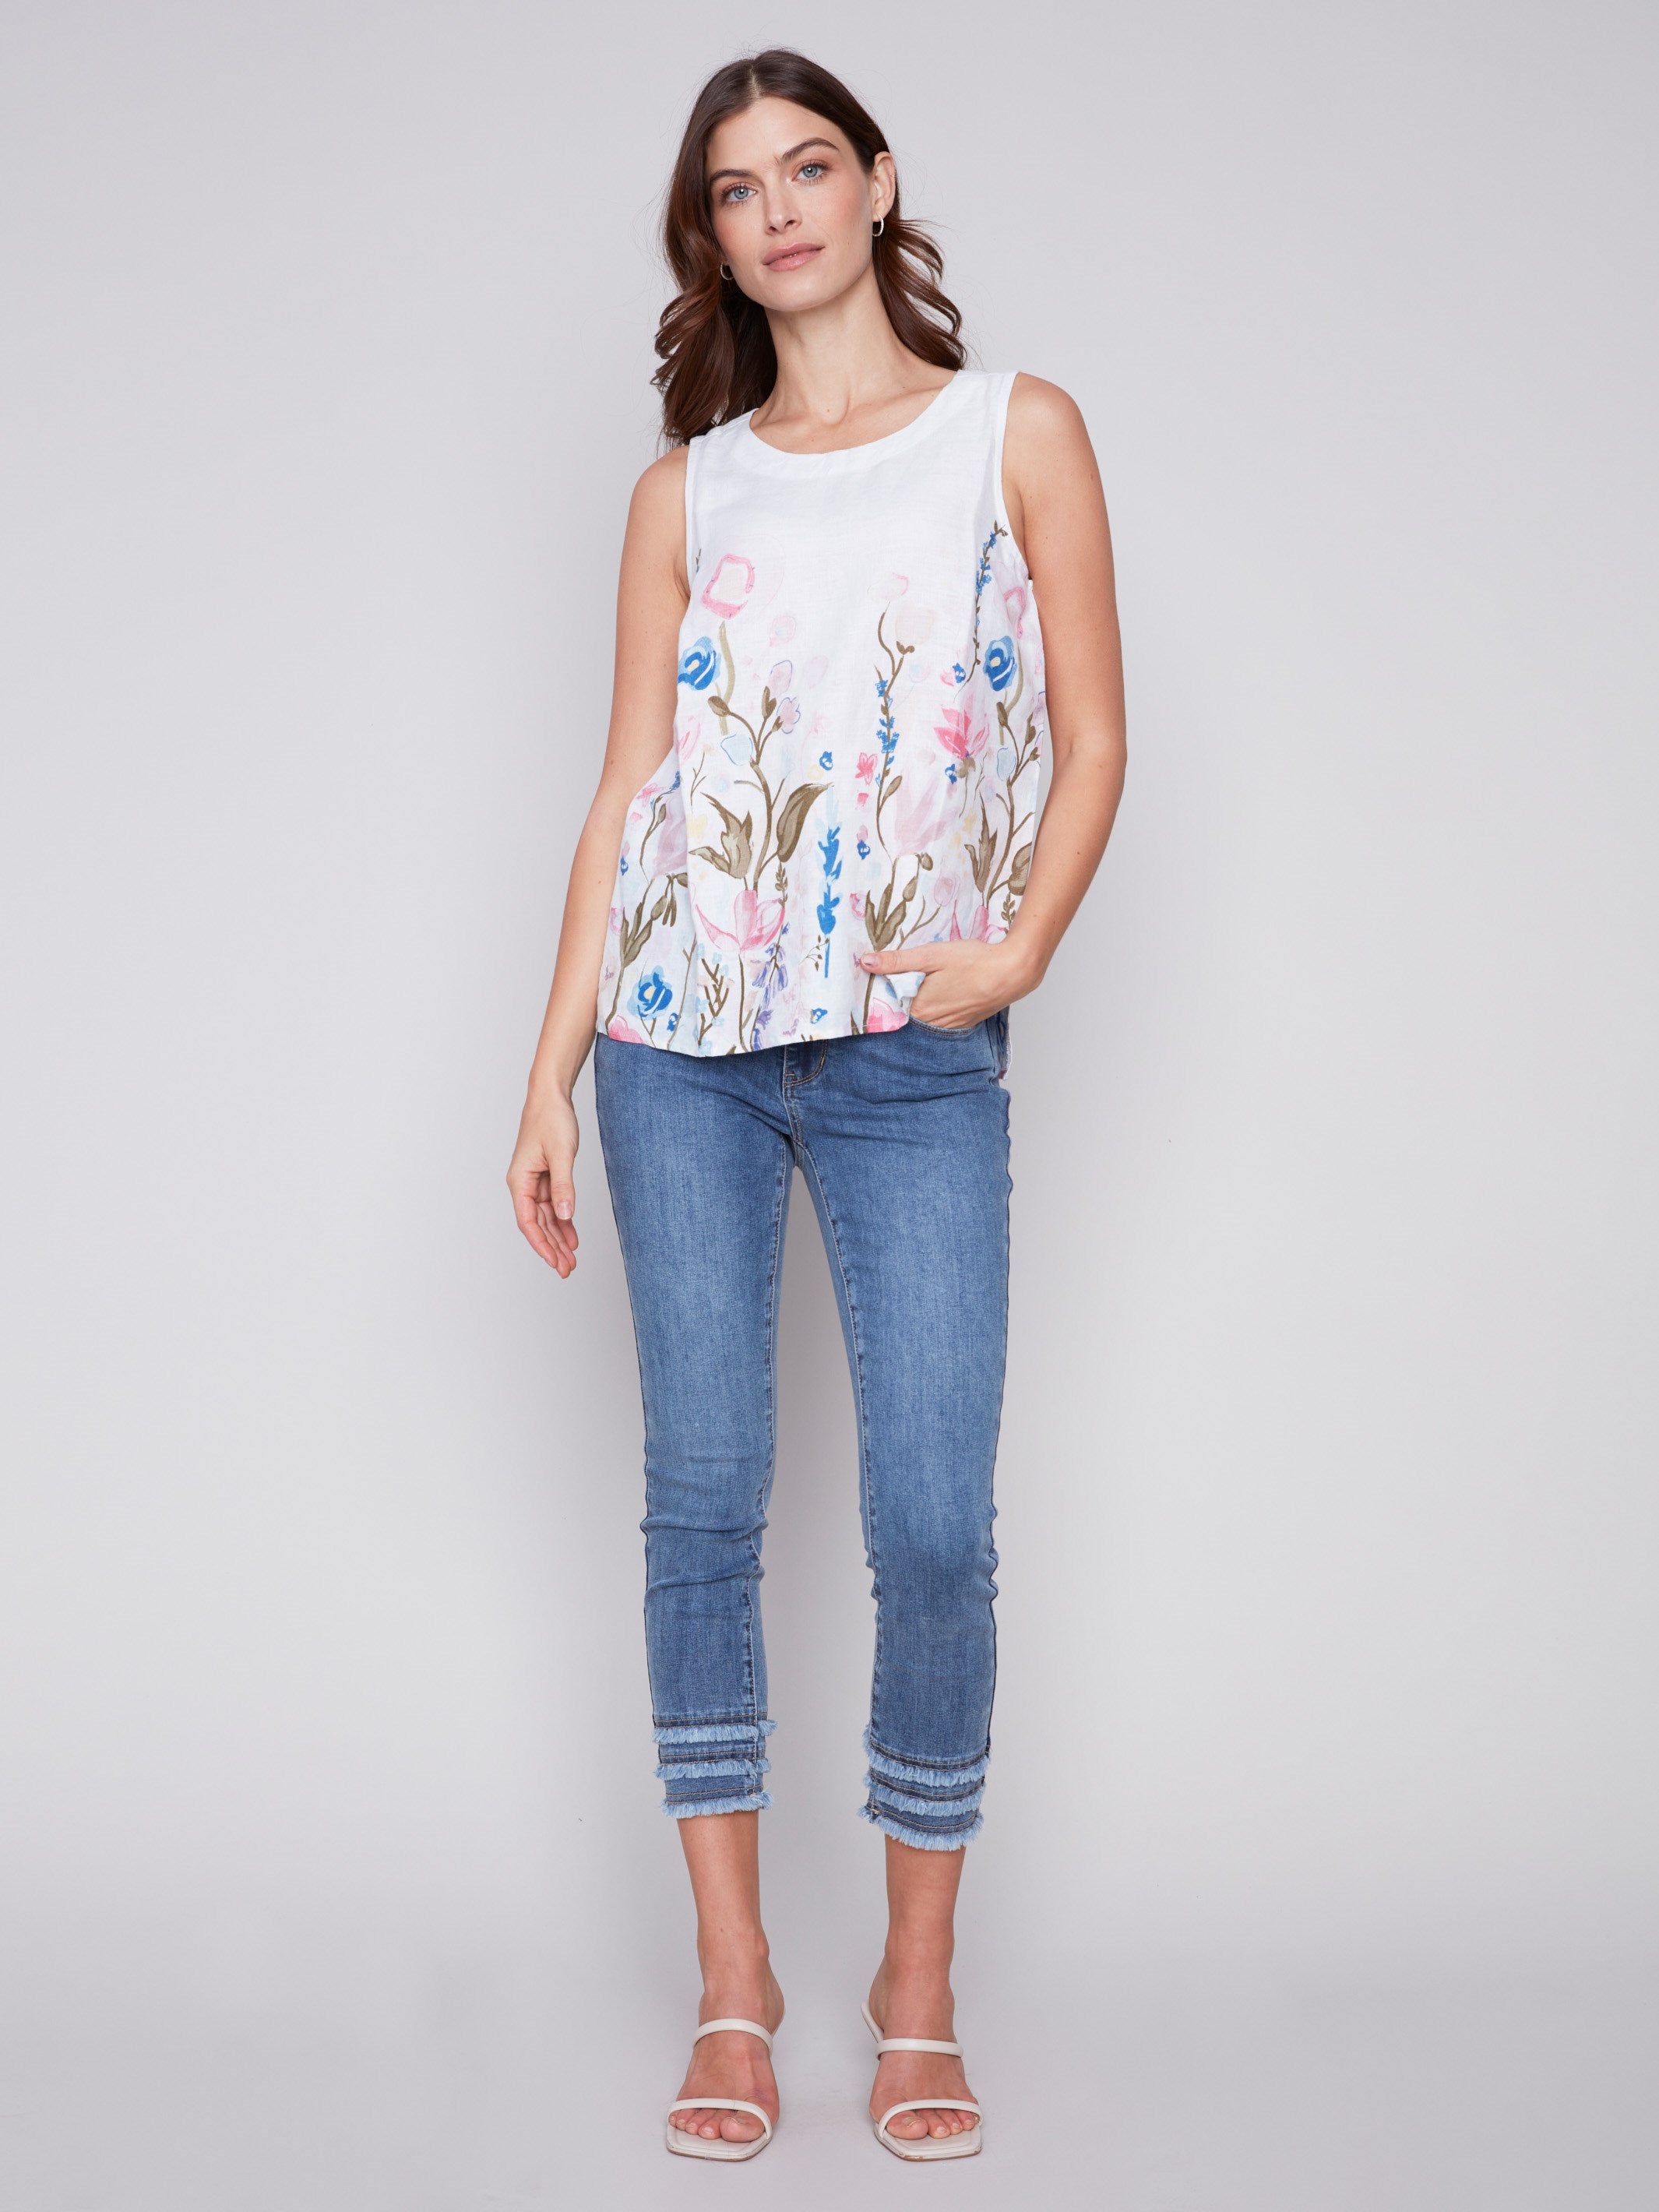 Sleeveless Floral Printed Linen Top - Pastel - Charlie B Collection Canada - Image 3